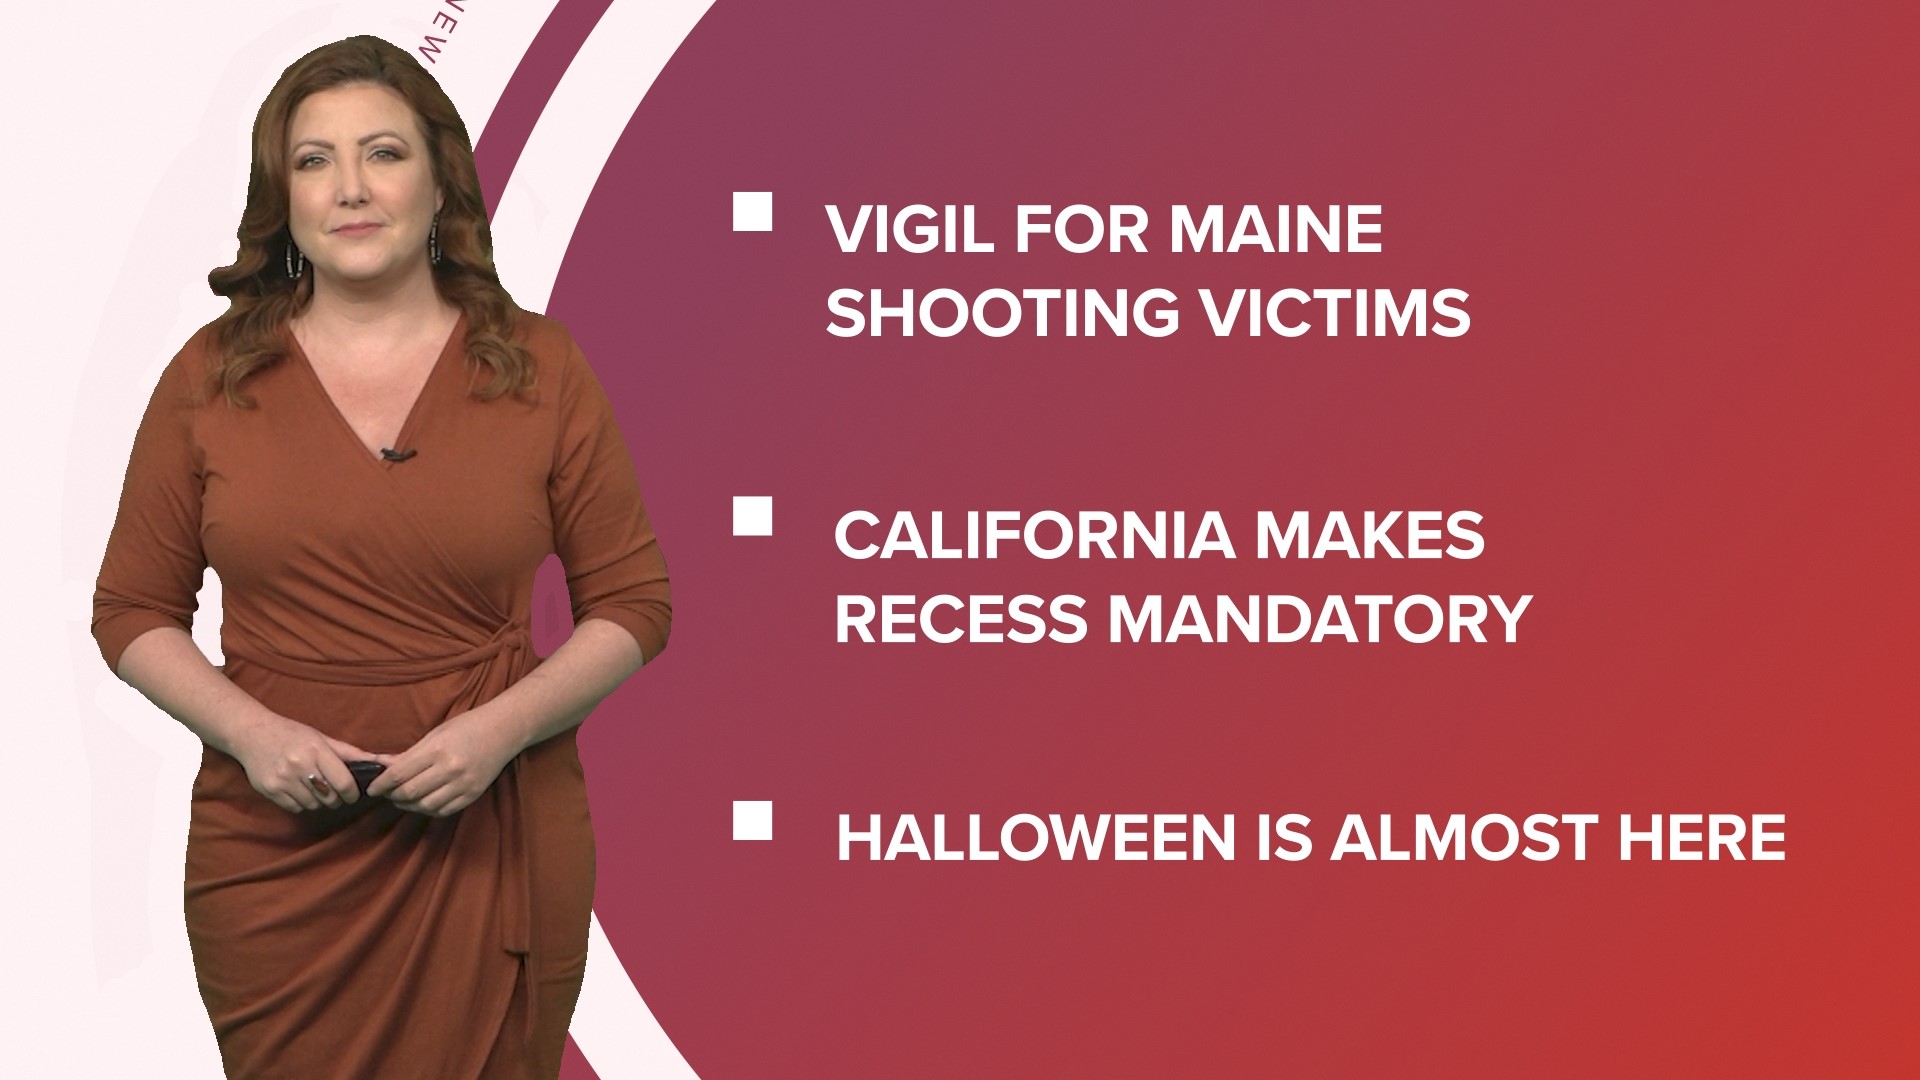 A look at what is happening in the news from the Lewiston, Maine community coming together in grief to California to mandate recess and busting myths for Halloween.